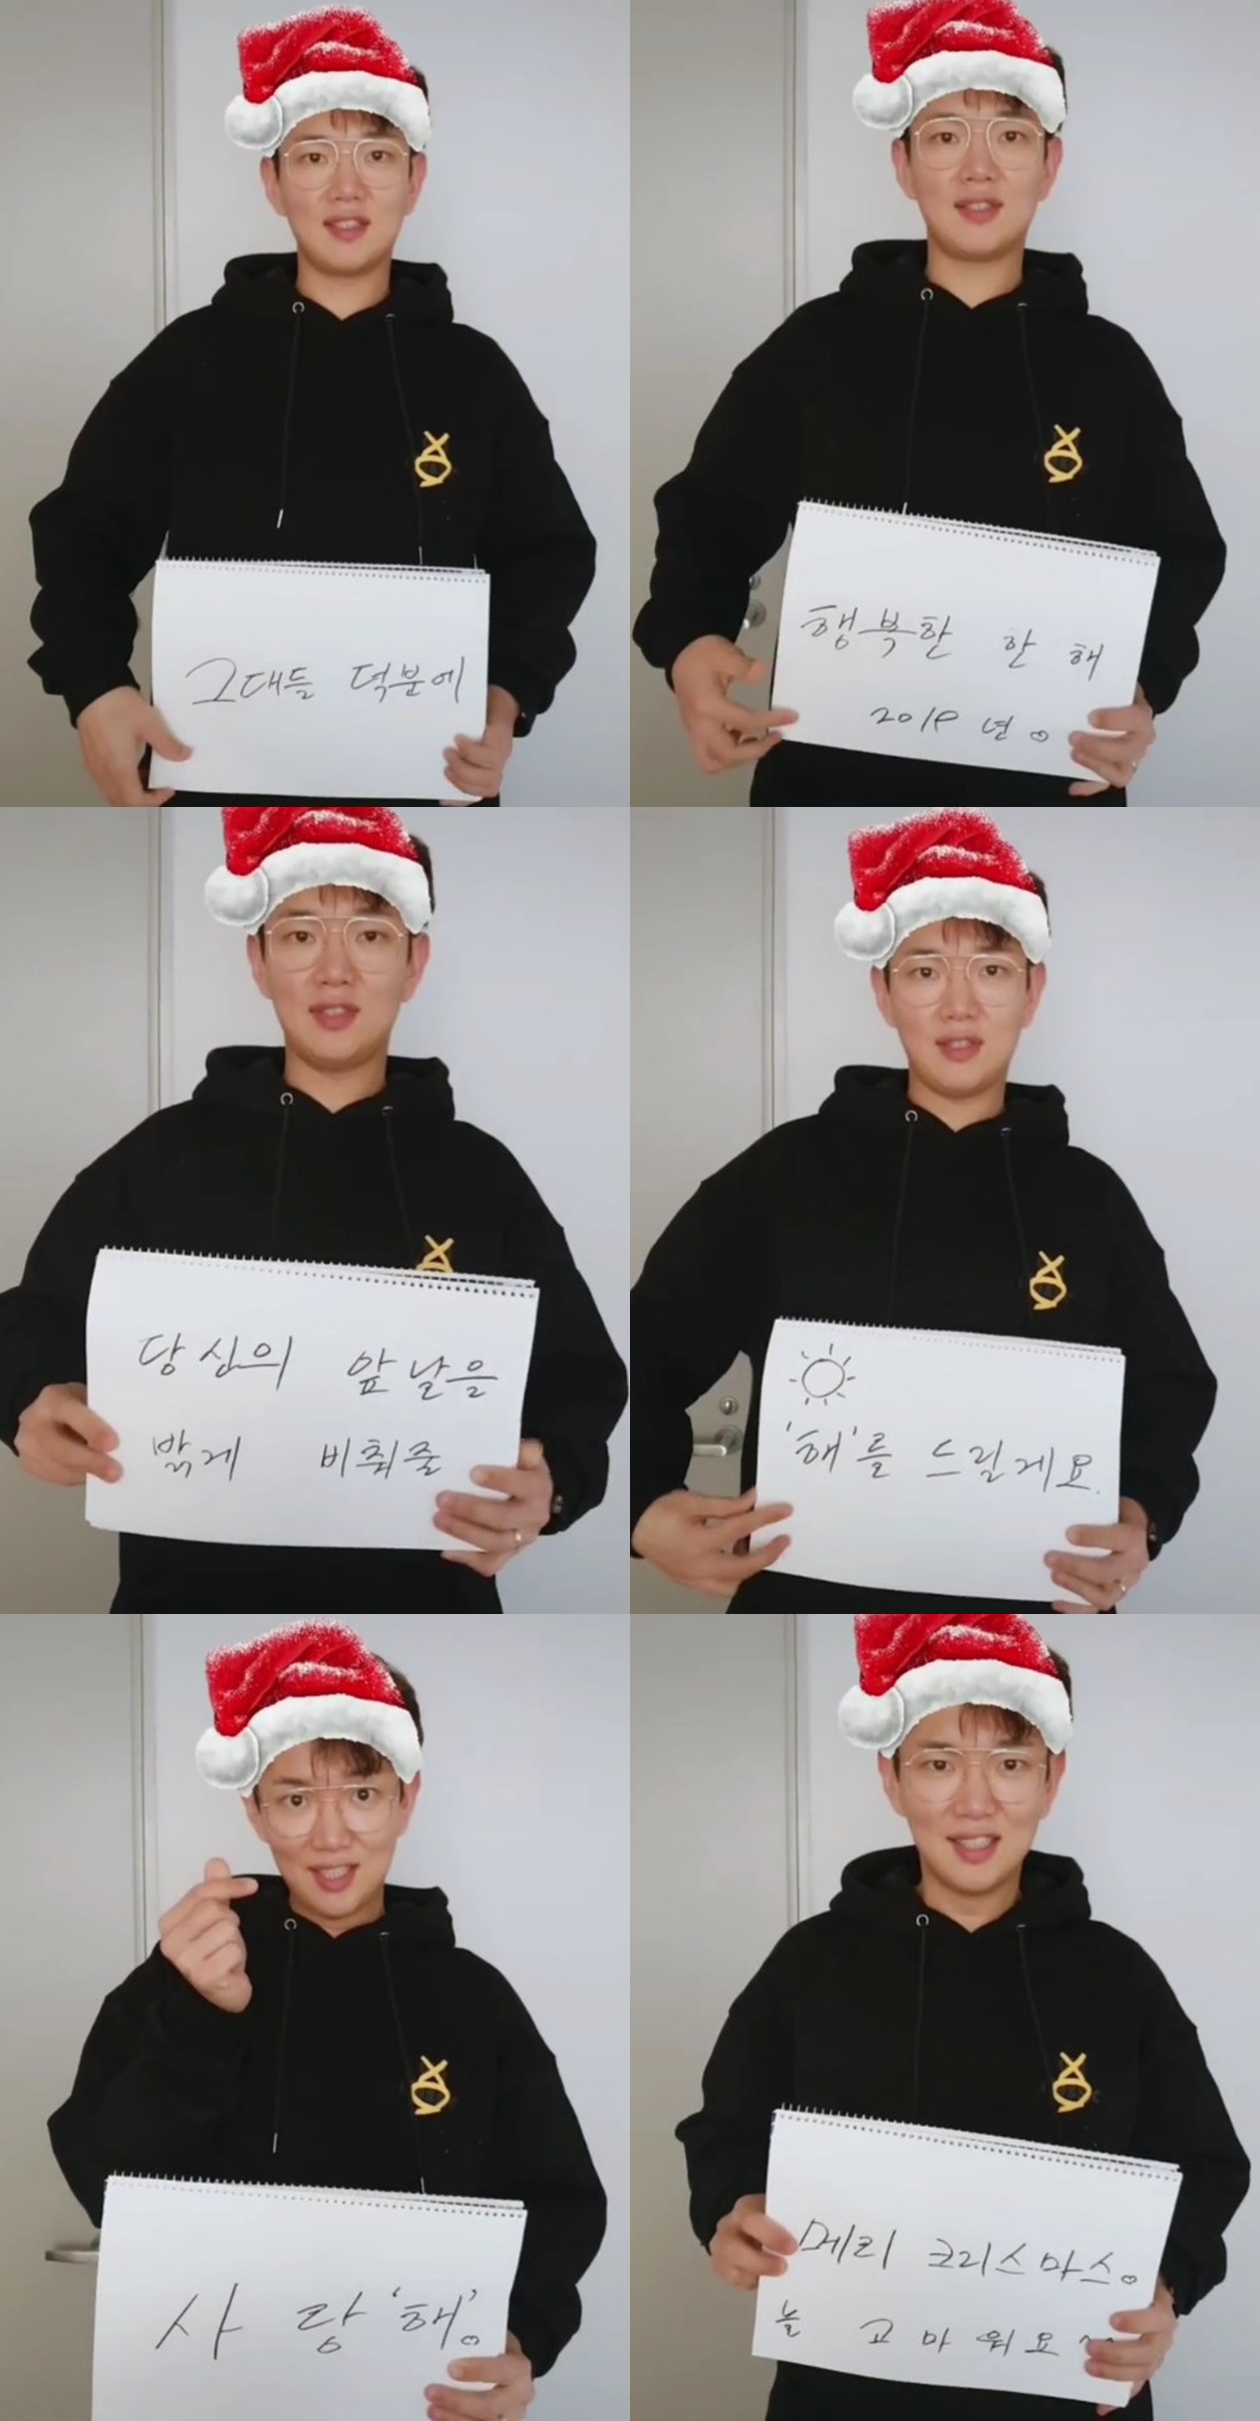 Broadcaster Jang Sung-kyu left Christmas greetings to fans who had a hot love this year.On the 24th, Jang Sung-kyu posted a video on his instagram with an article entitled Mary Christmas # Diing # Hand Letter # Hand Card # Yoo Hee Yeols Sketchbook.Jang Sung-kyu in the public image is wearing a Santa hat through a mobile phone application.Jang Sung-kyu thanked his fans for the Sketchbook event, which is a movie Love Actual.The Sketchbook, which appears to have been written by Jang Sung-kyu himself, says, My gut line, miscellaneous things, my children, solitude.In return, I will give you the sun to brighten your future, love. Mary Christmas Thank you always. Jang Sung-kyu also winked with Son Hart in line with the comment.Jang Line, Jiji, Imma, and Solitary all refer to fans of Jang Sung-kyu.In the affectionate letter to the fans, you can get a glimpse of the unique witty gesture of Jang Sung-kyu.Meanwhile, Jang Sung-kyu, who was the first announcer of JTBCs public bond, was loved by the nickname Sunnumgyu for his bomb remarks that crossed the line of broadcasting deliberations, appearing on the YouTube channel Workman and MBC entertainment program Power of Positive Interference in April this year.Since then, Jang Sung-kyu has been selected as a fixed MC for various entertainment programs such as JTBCs Hogu Chart and KBS2s Sage Childrens Life, and has been in charge of MBC radio Good Morning FM Jang Sung-kyu.PhotoJang Sung-kyu SNS